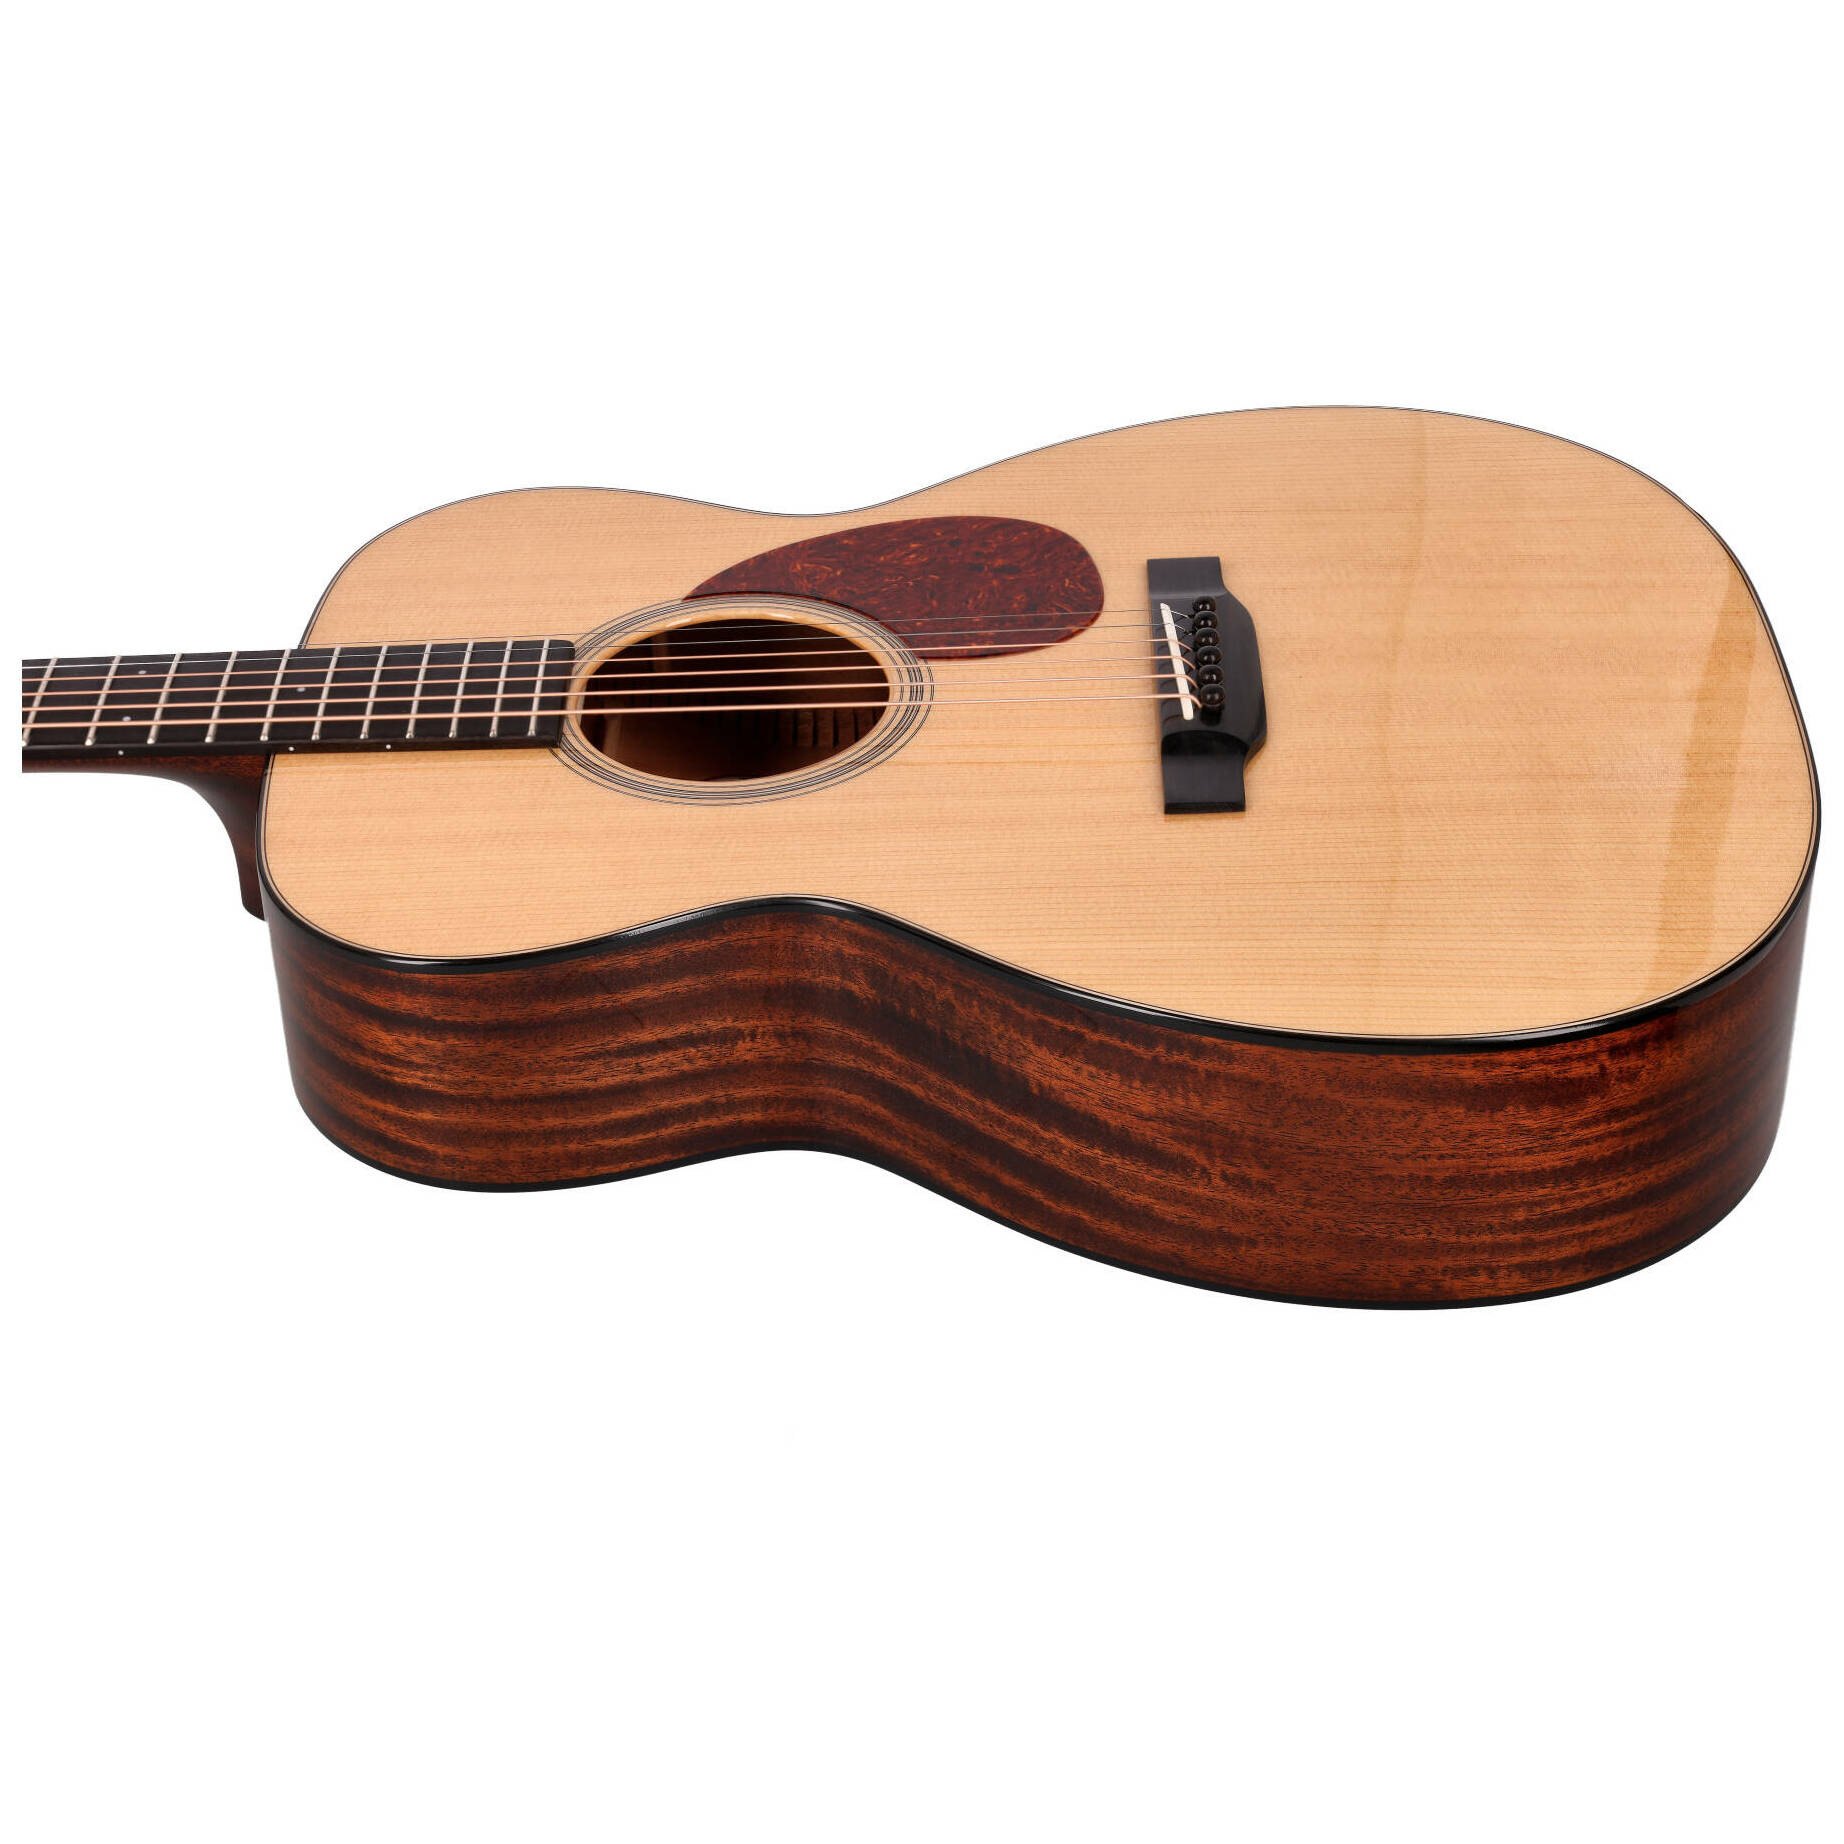 Bourgeois Guitars OM CountryBoy Touchstone 9